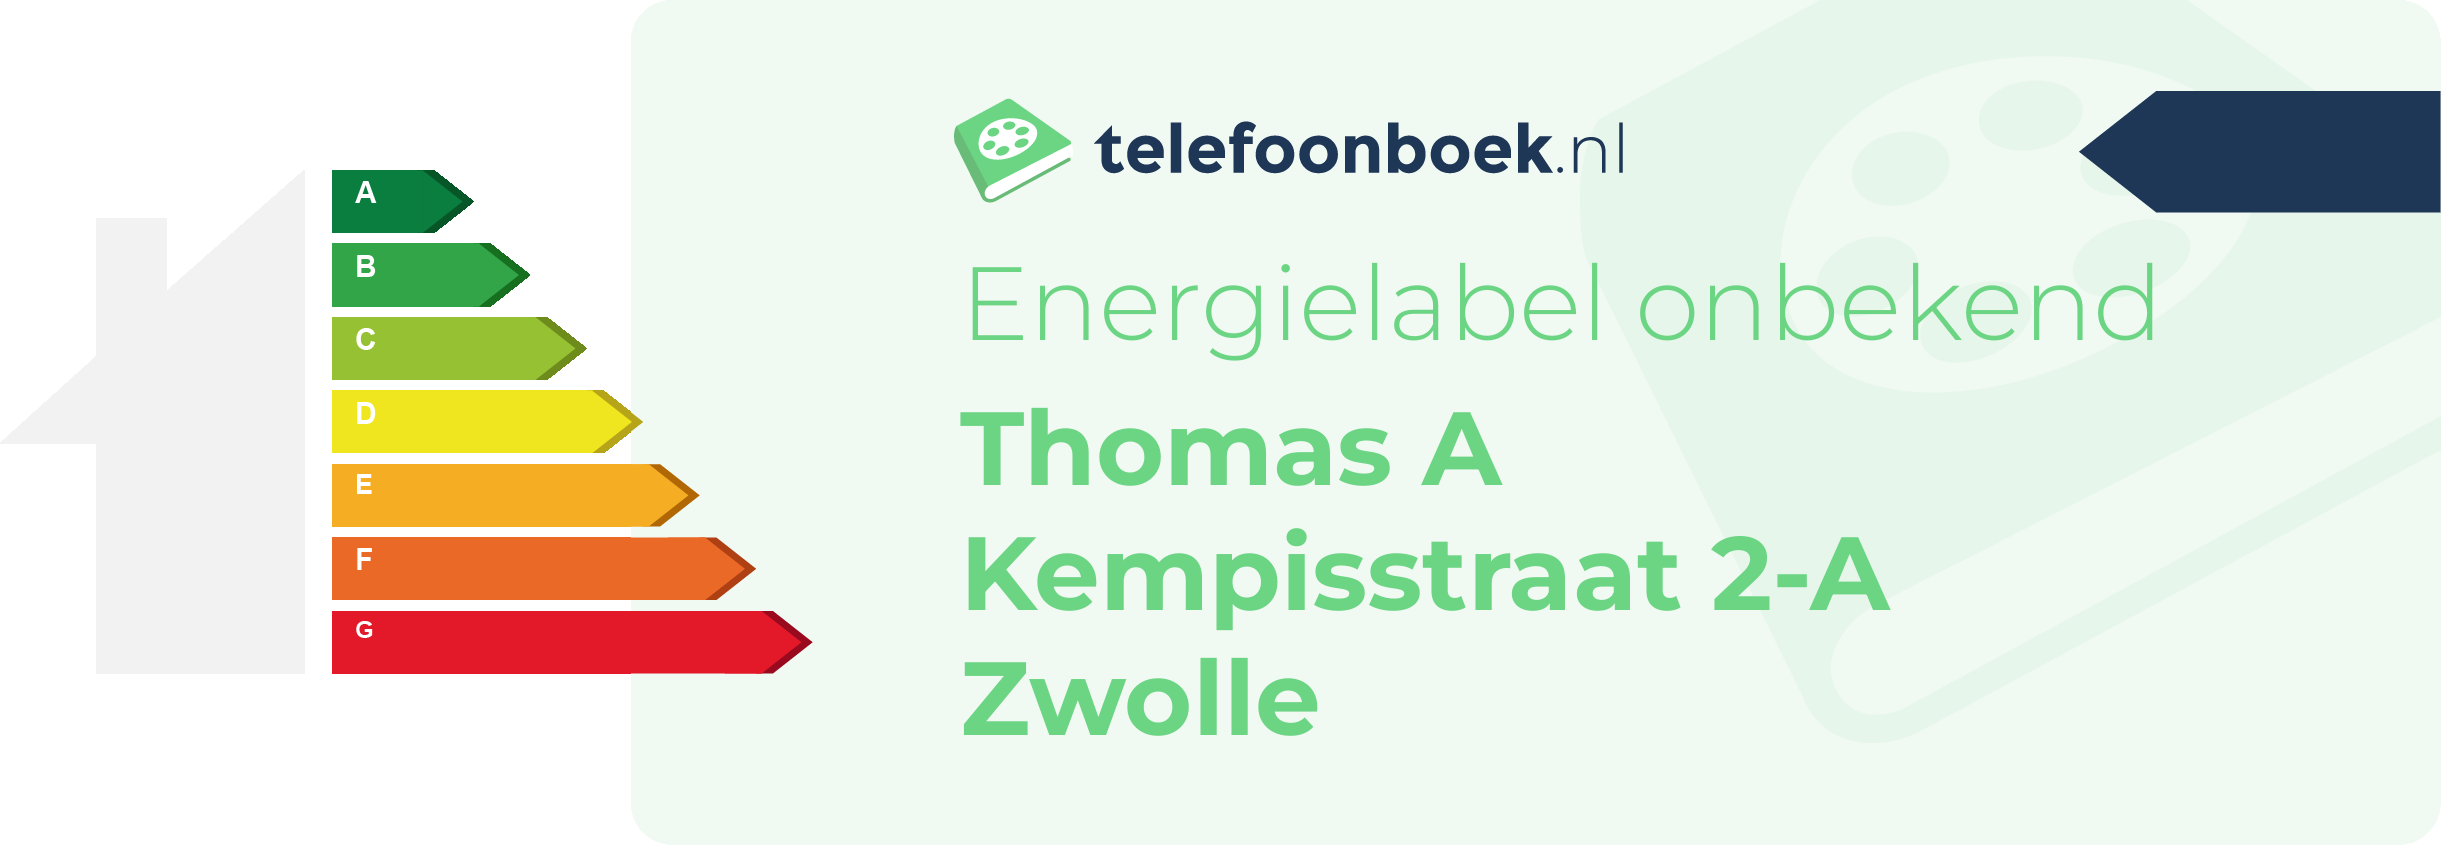 Energielabel Thomas A Kempisstraat 2-A Zwolle